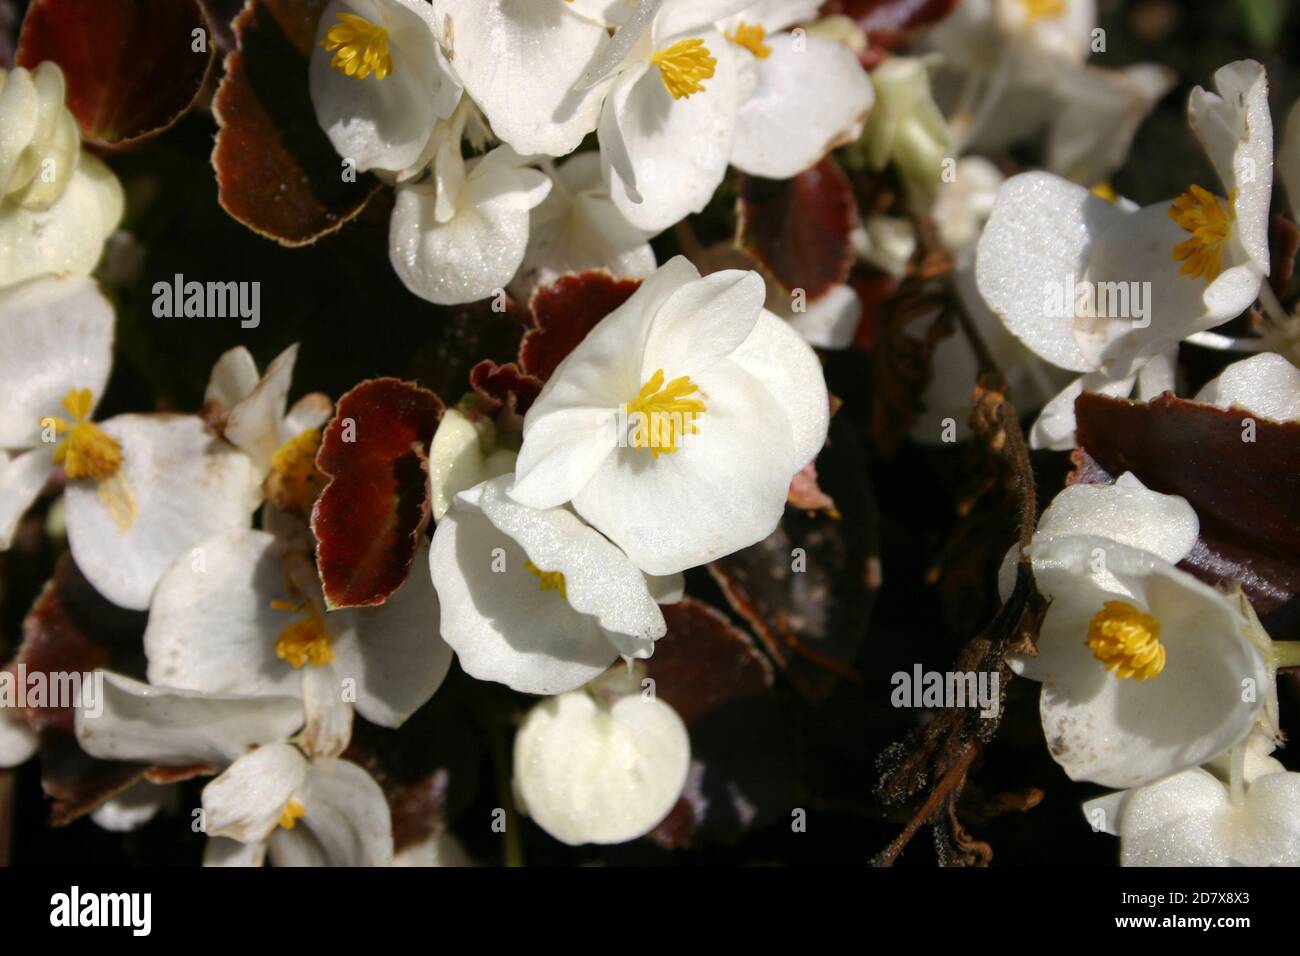 CLOSE-UP OF WHITE BEDDING BEGONIA FLOWERS Stock Photo